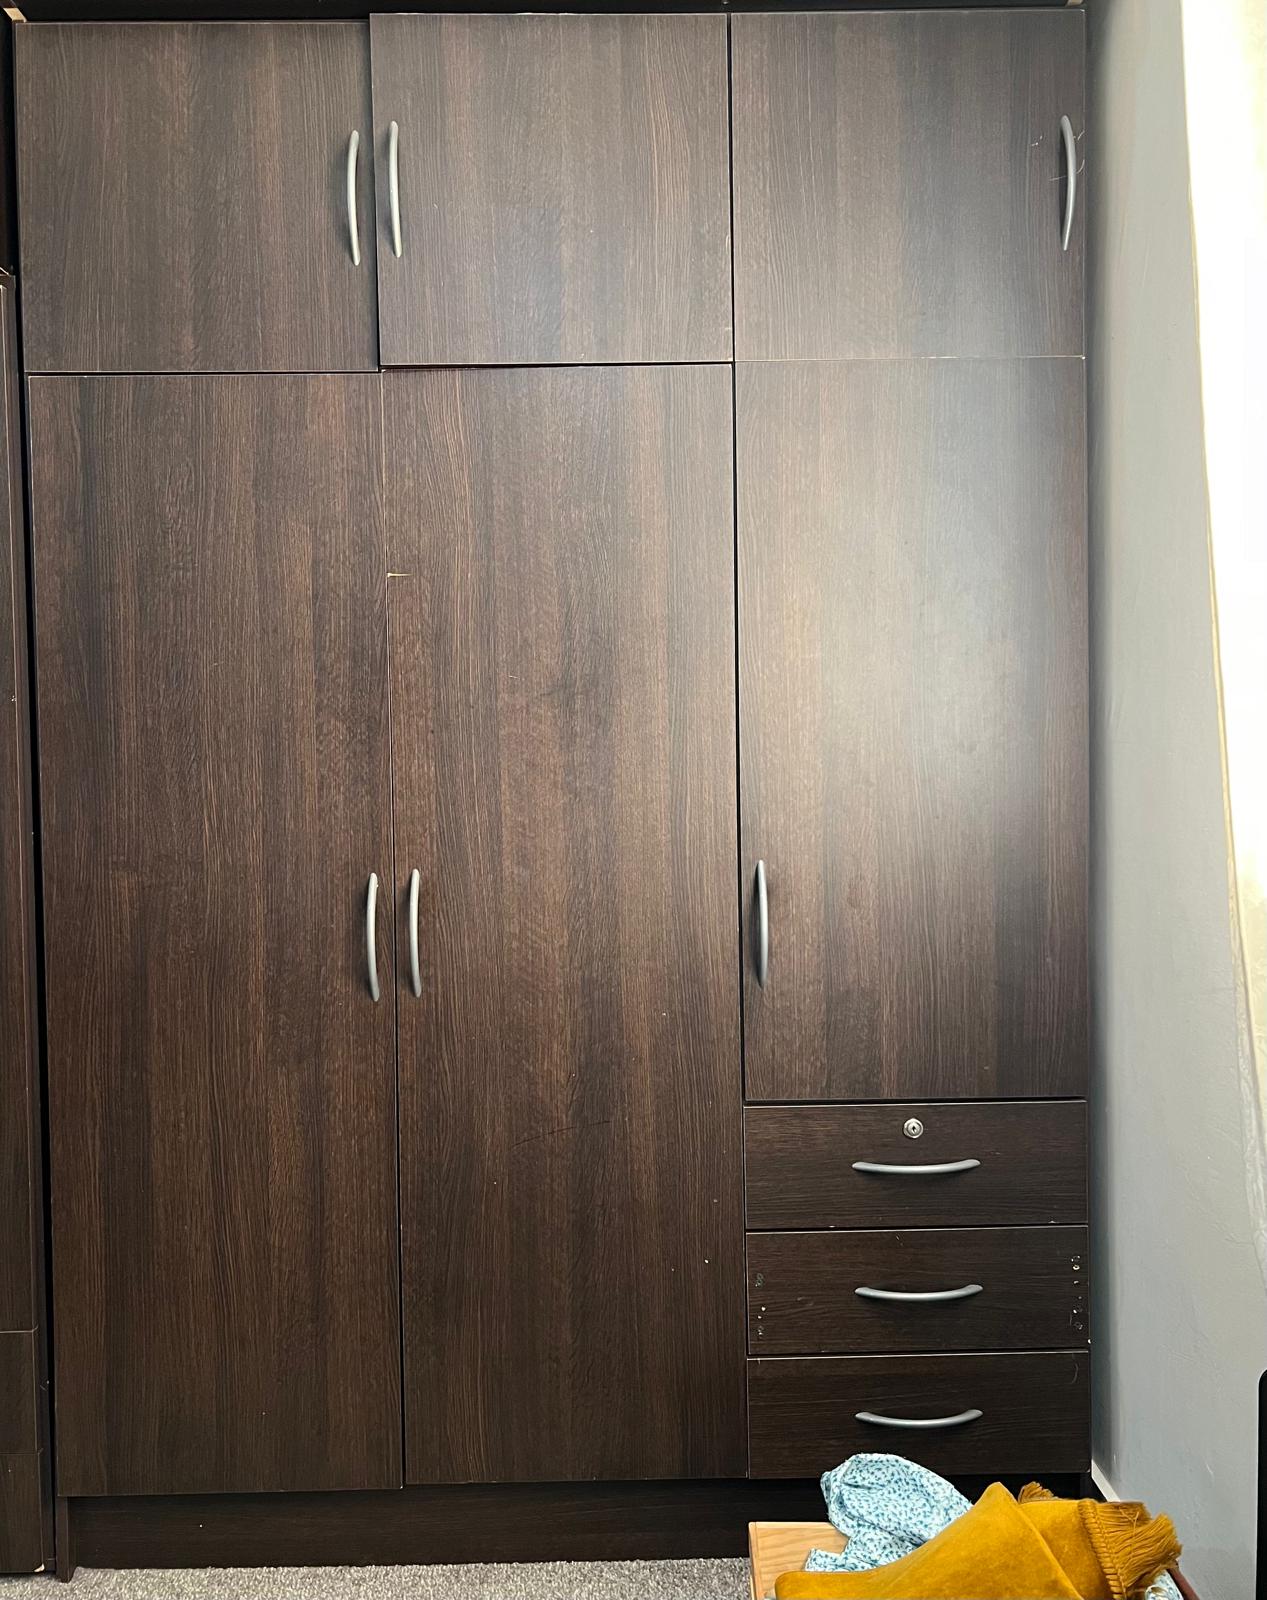 2 Cupboards +King size Bed frame+ Mattress + Side table for sale